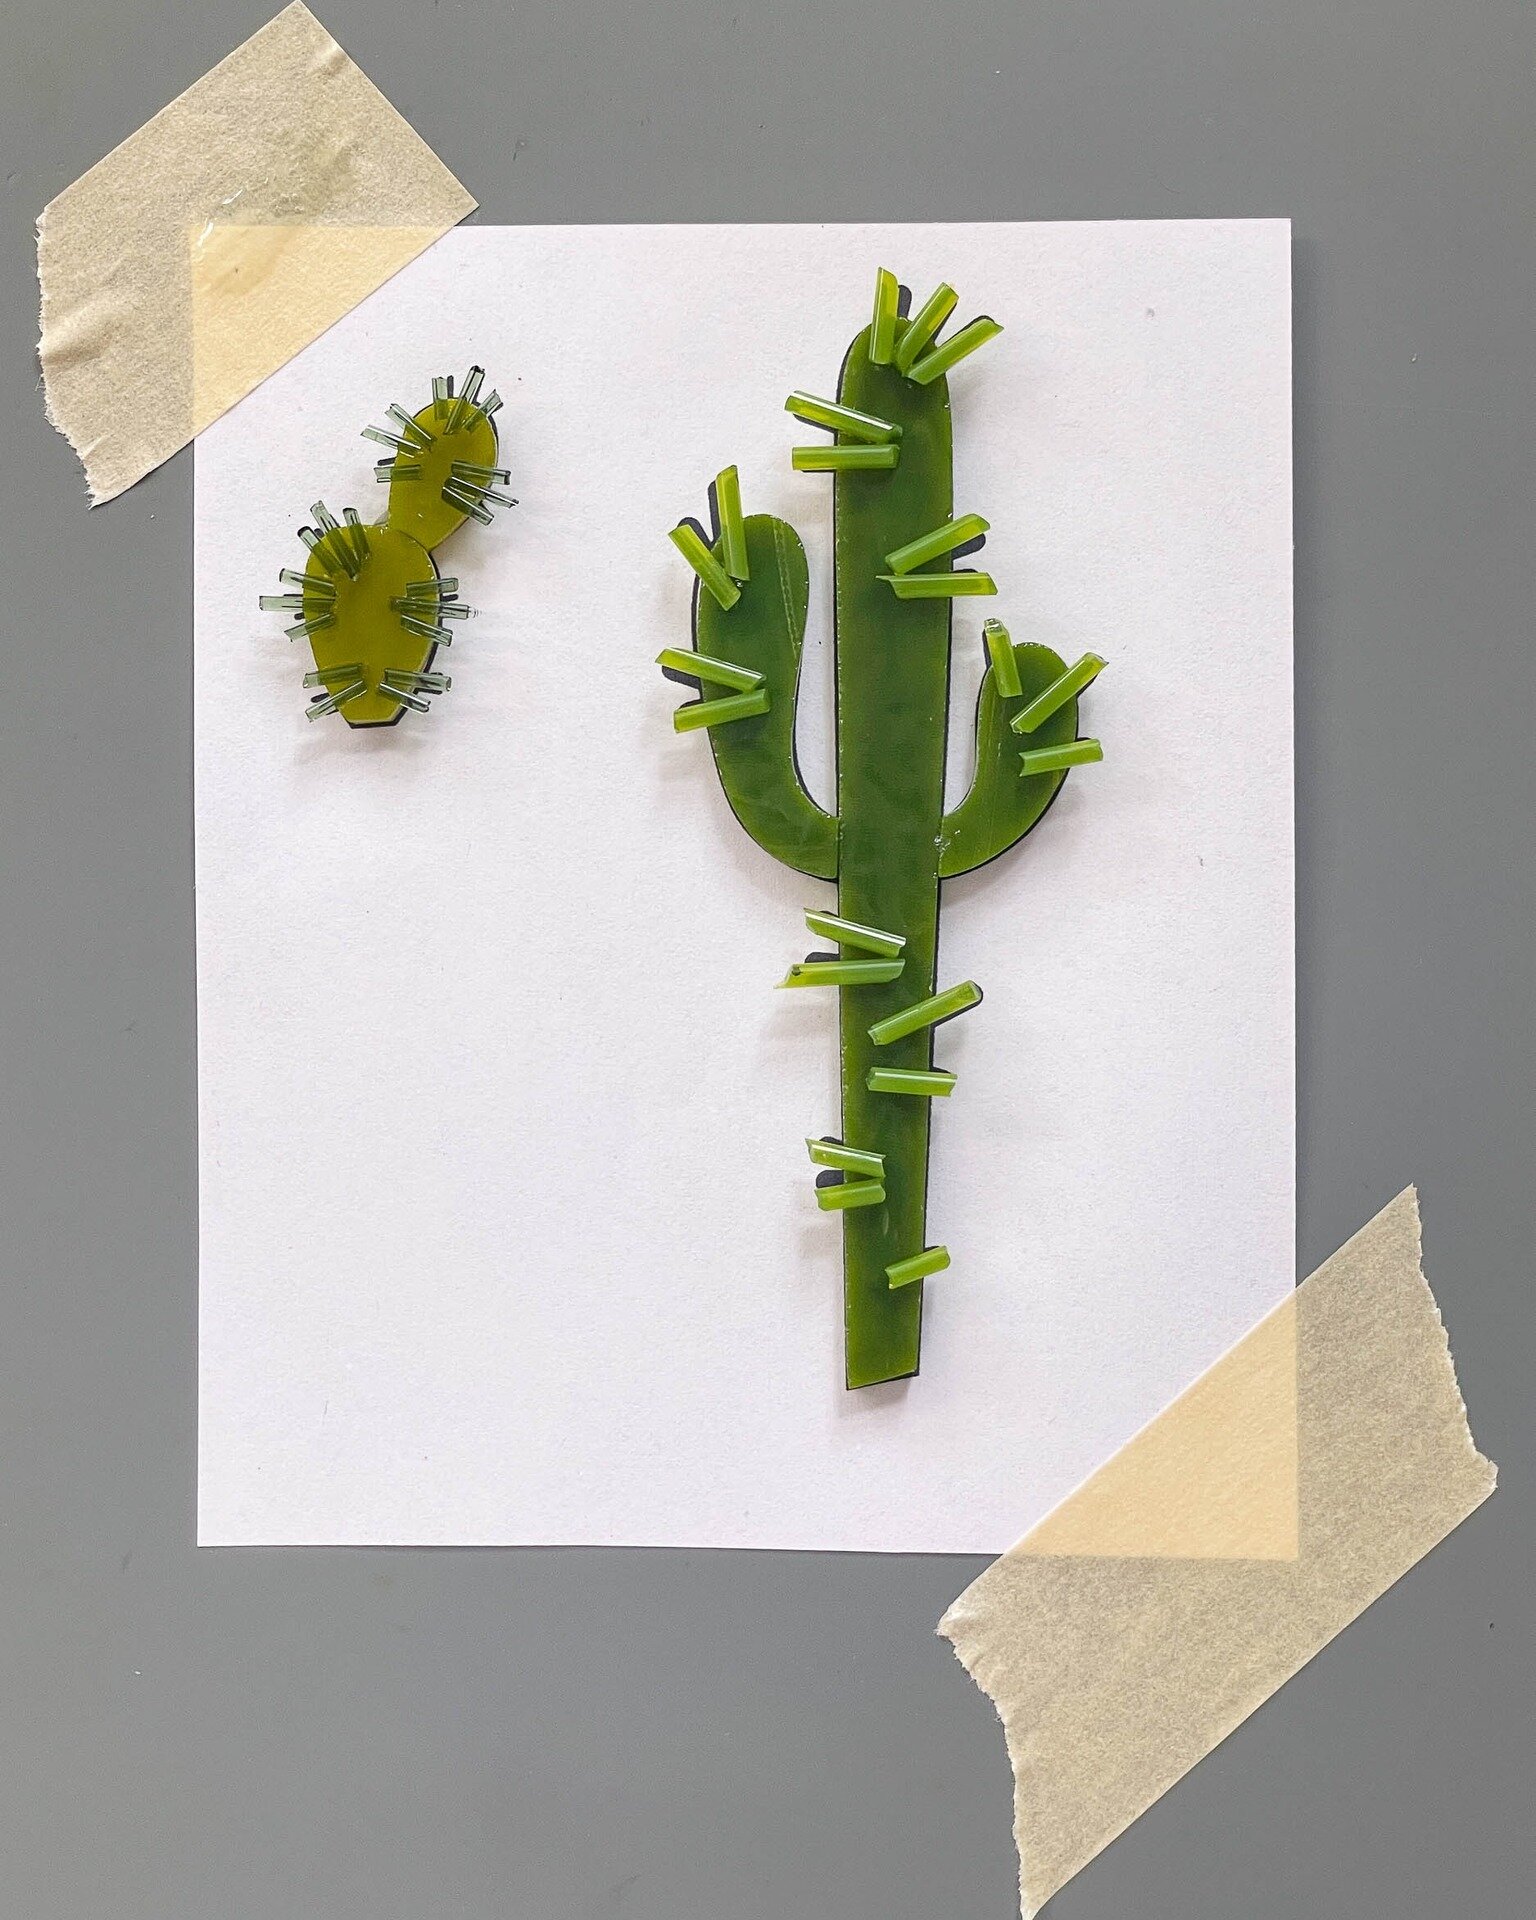 Time to get these spikeybois in the oven 🔥⁣⁣⁣
⁣⁣⁣
⁣⁣⁣
⁣⁣⁣
⁣⁣⁣
⁣⁣⁣
#cactuslover #cactuslovers #cactusgarden #cactusaddict #cactusgram #cactusart #fusedglass #stainedglass